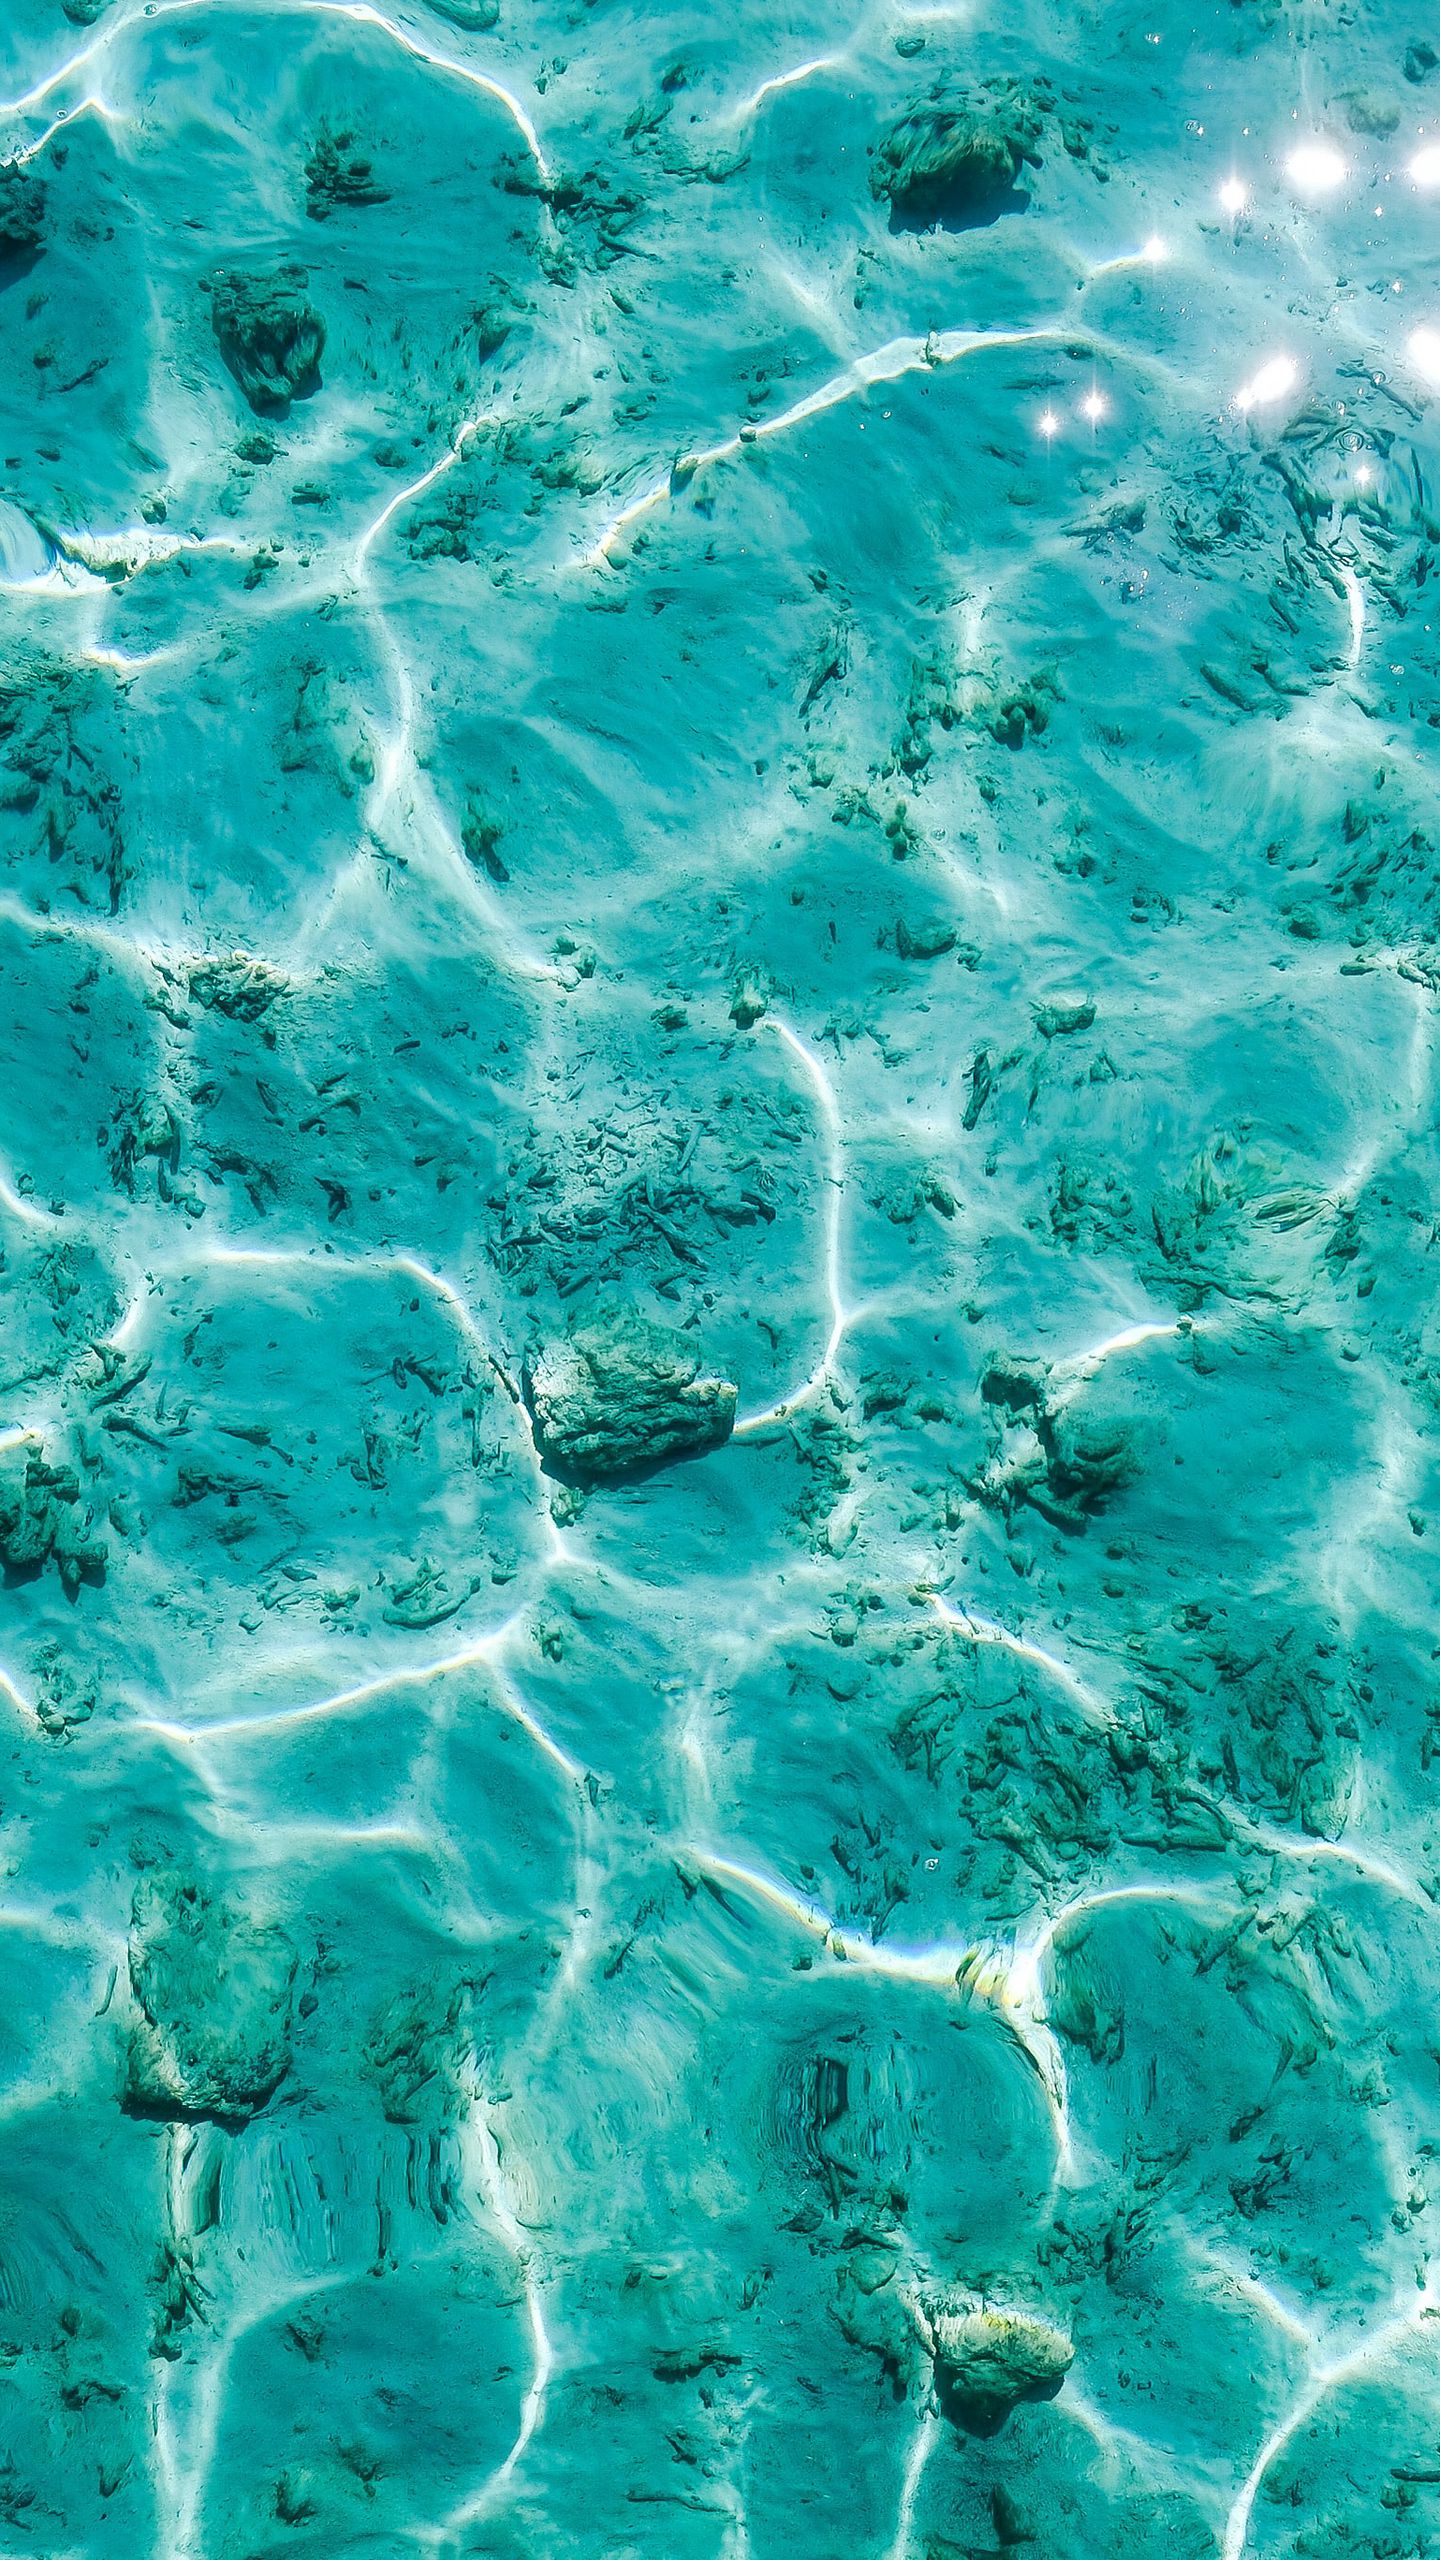 Download wallpaper 1440x2560 water, turquoise, glare, texture qhd samsung  galaxy s6, s7, edge, note, lg g4 hd background